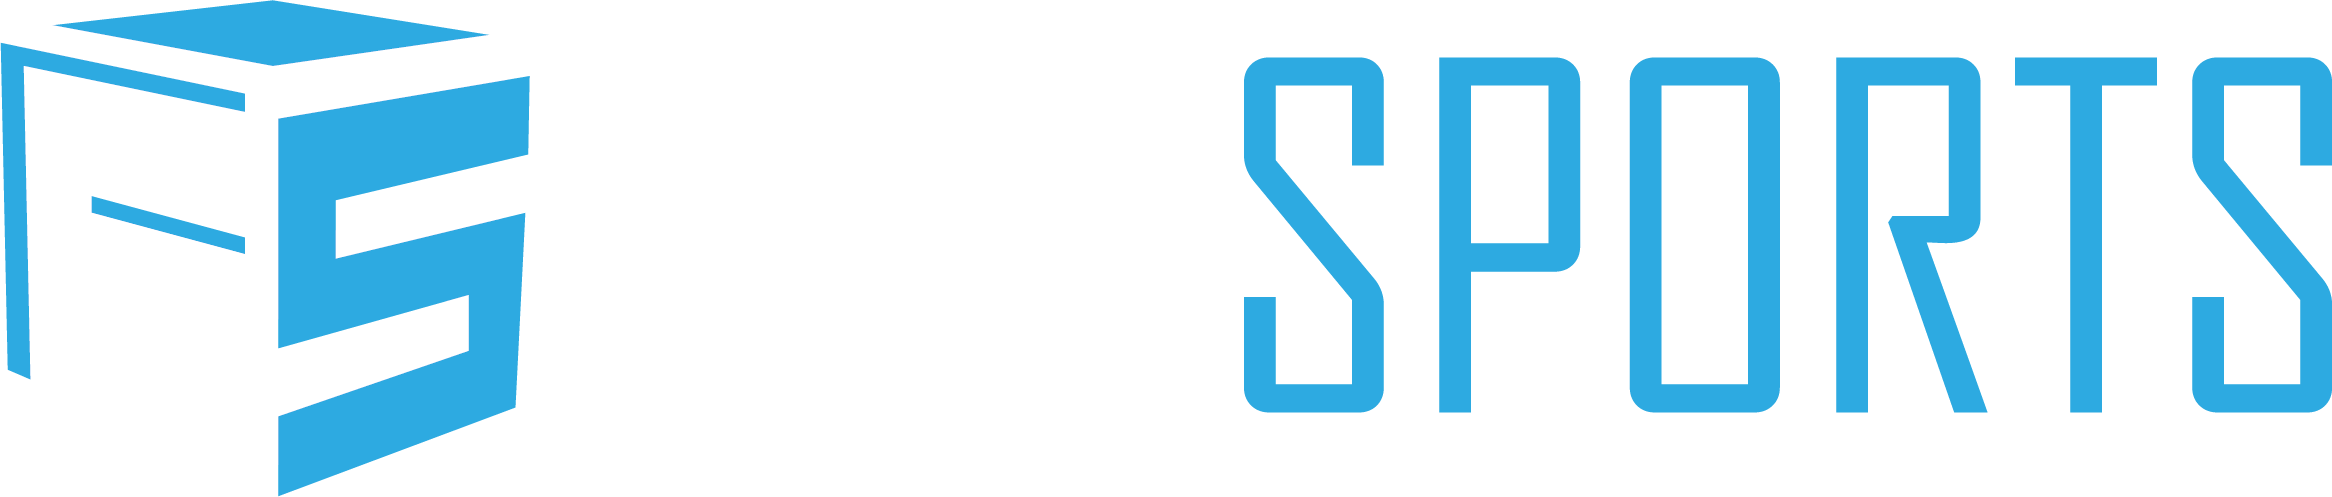 Forsports